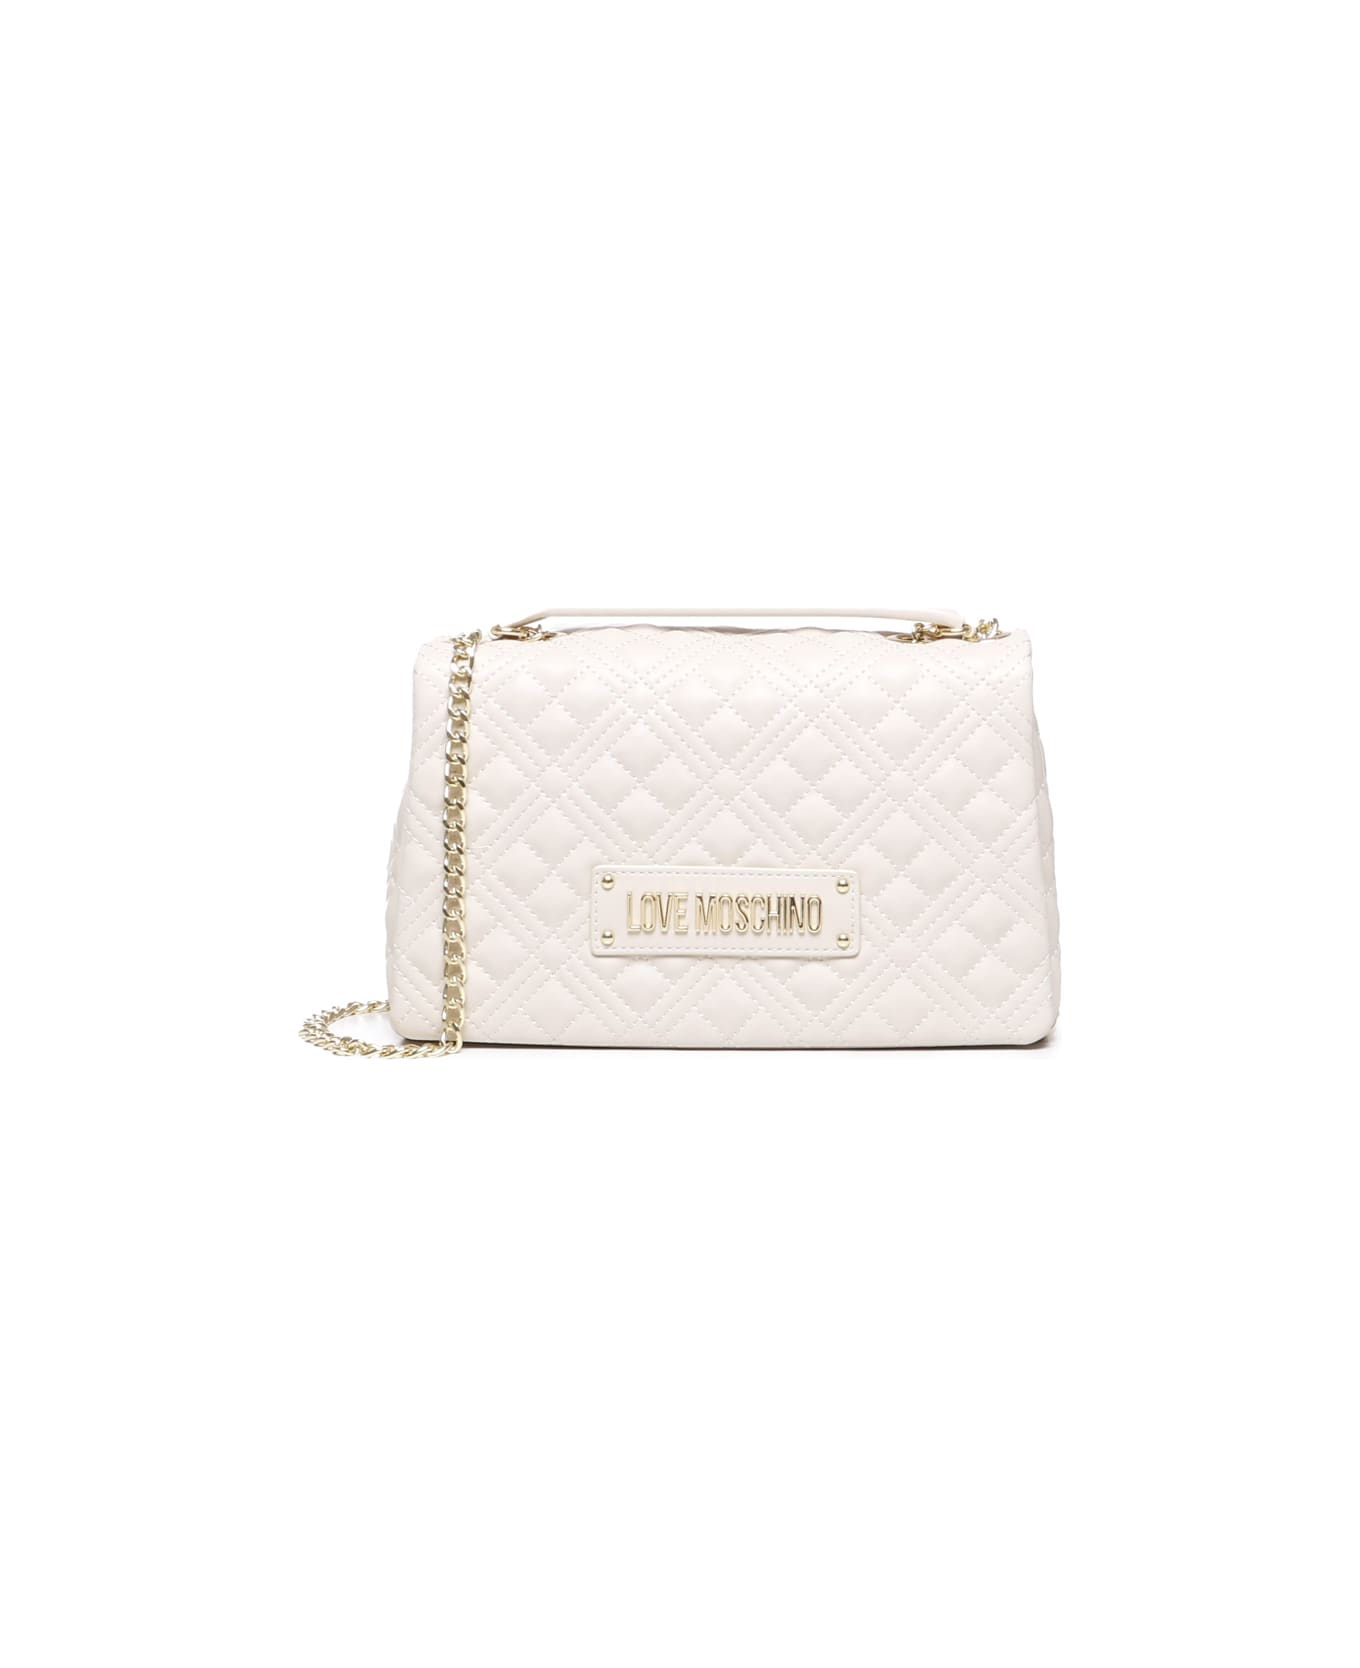 Love Moschino Bag With Shoulder Strap With Logo - Ivory ショルダーバッグ